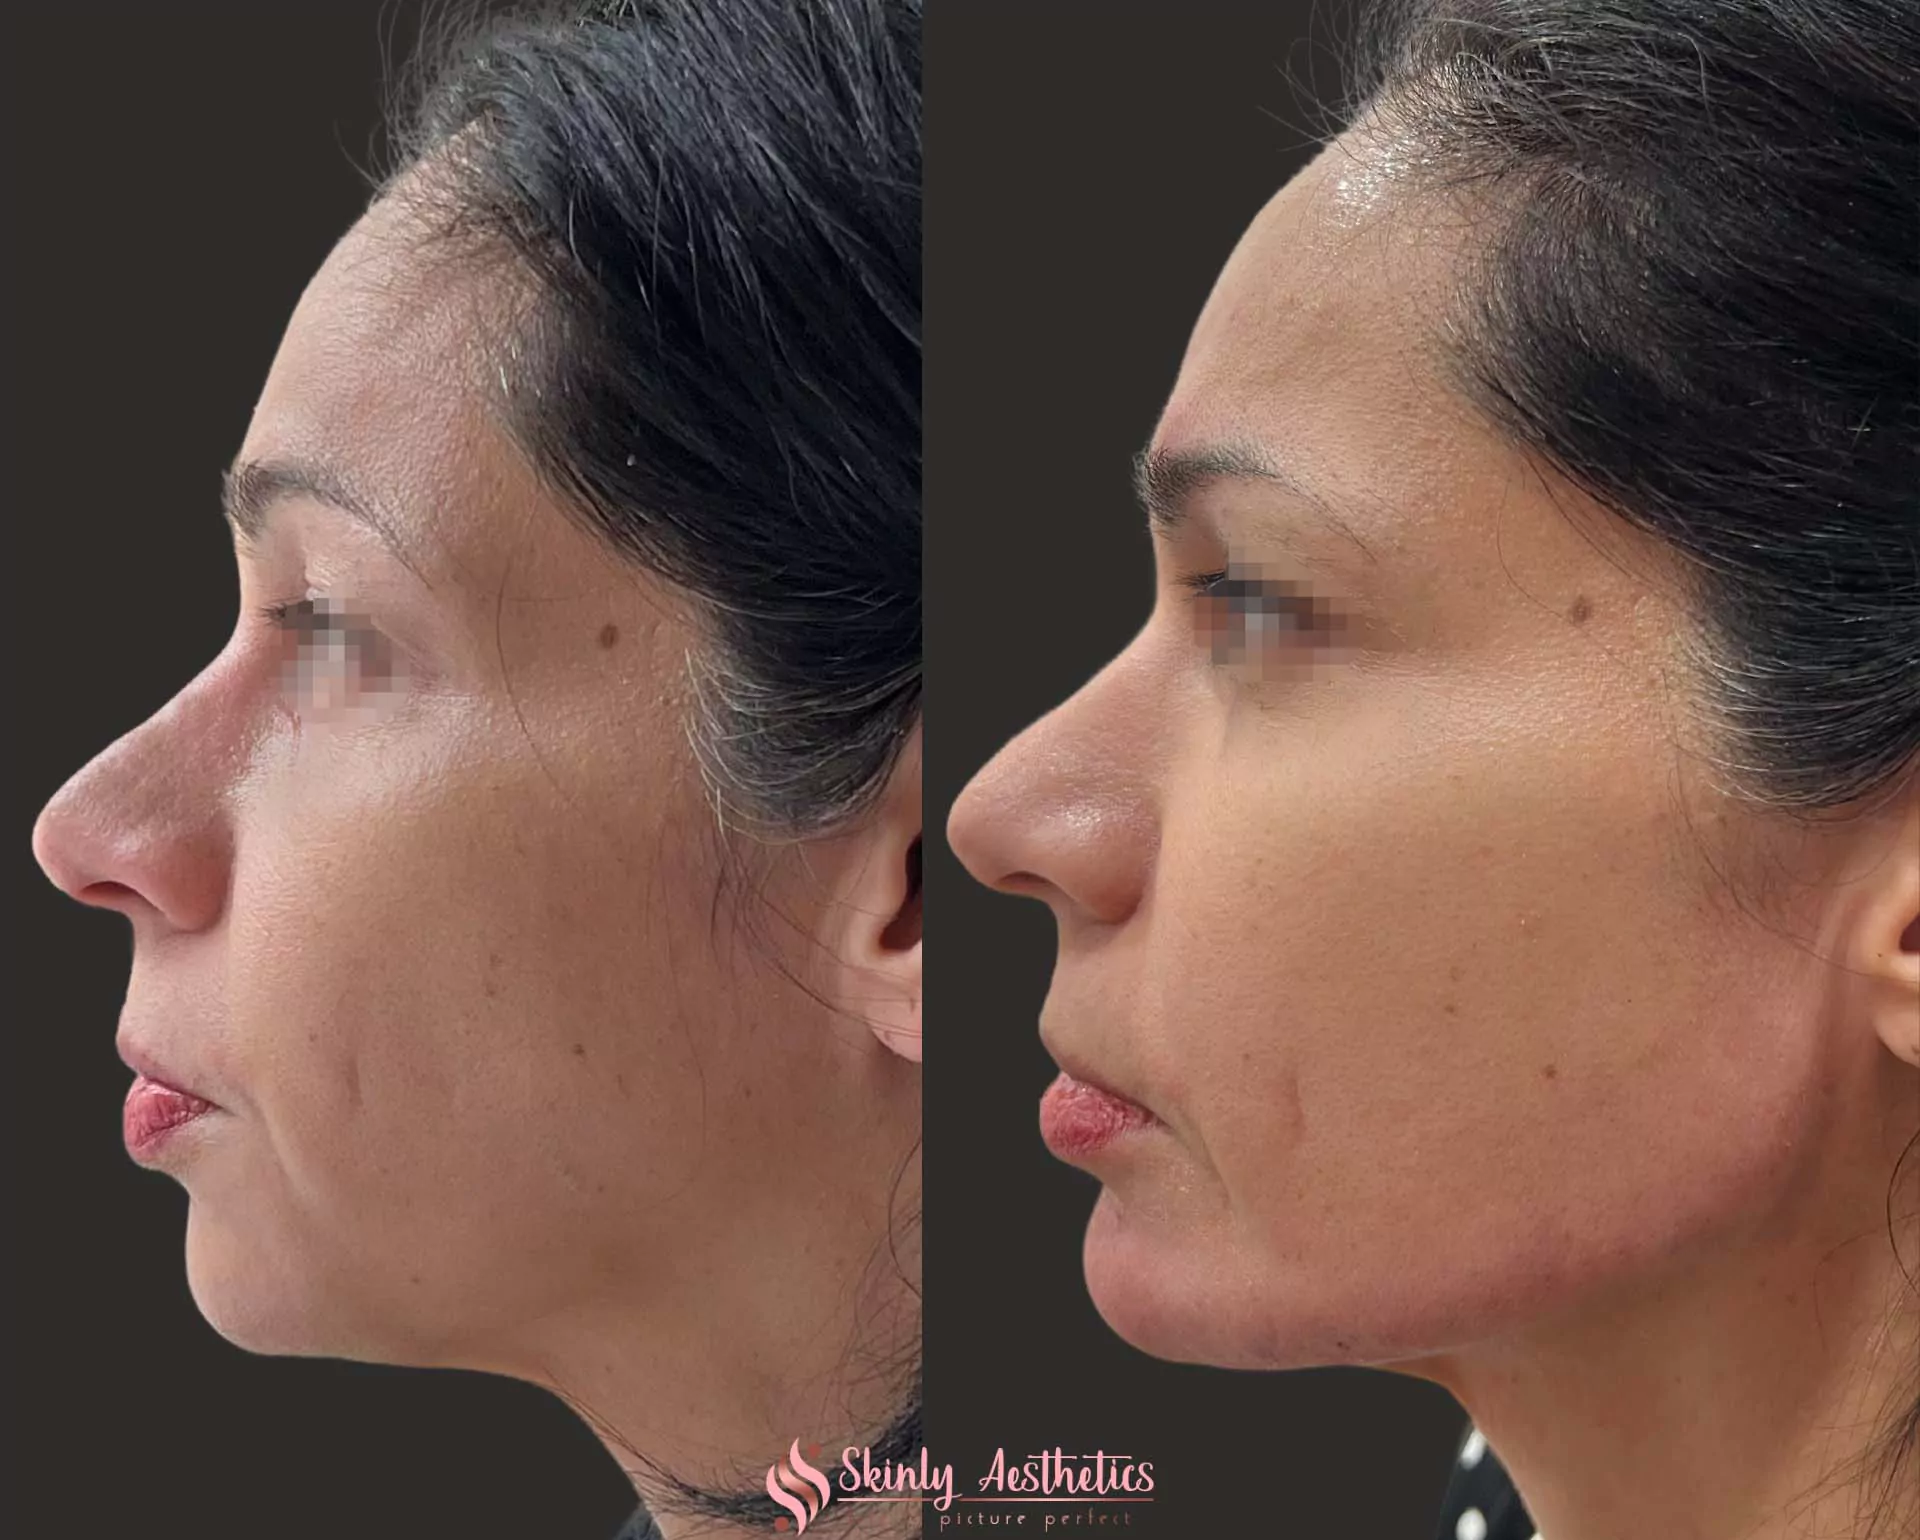 jawline and chin augmentation and sculpting following injections with Radiesse and Juvederm Voluma dermal fillers